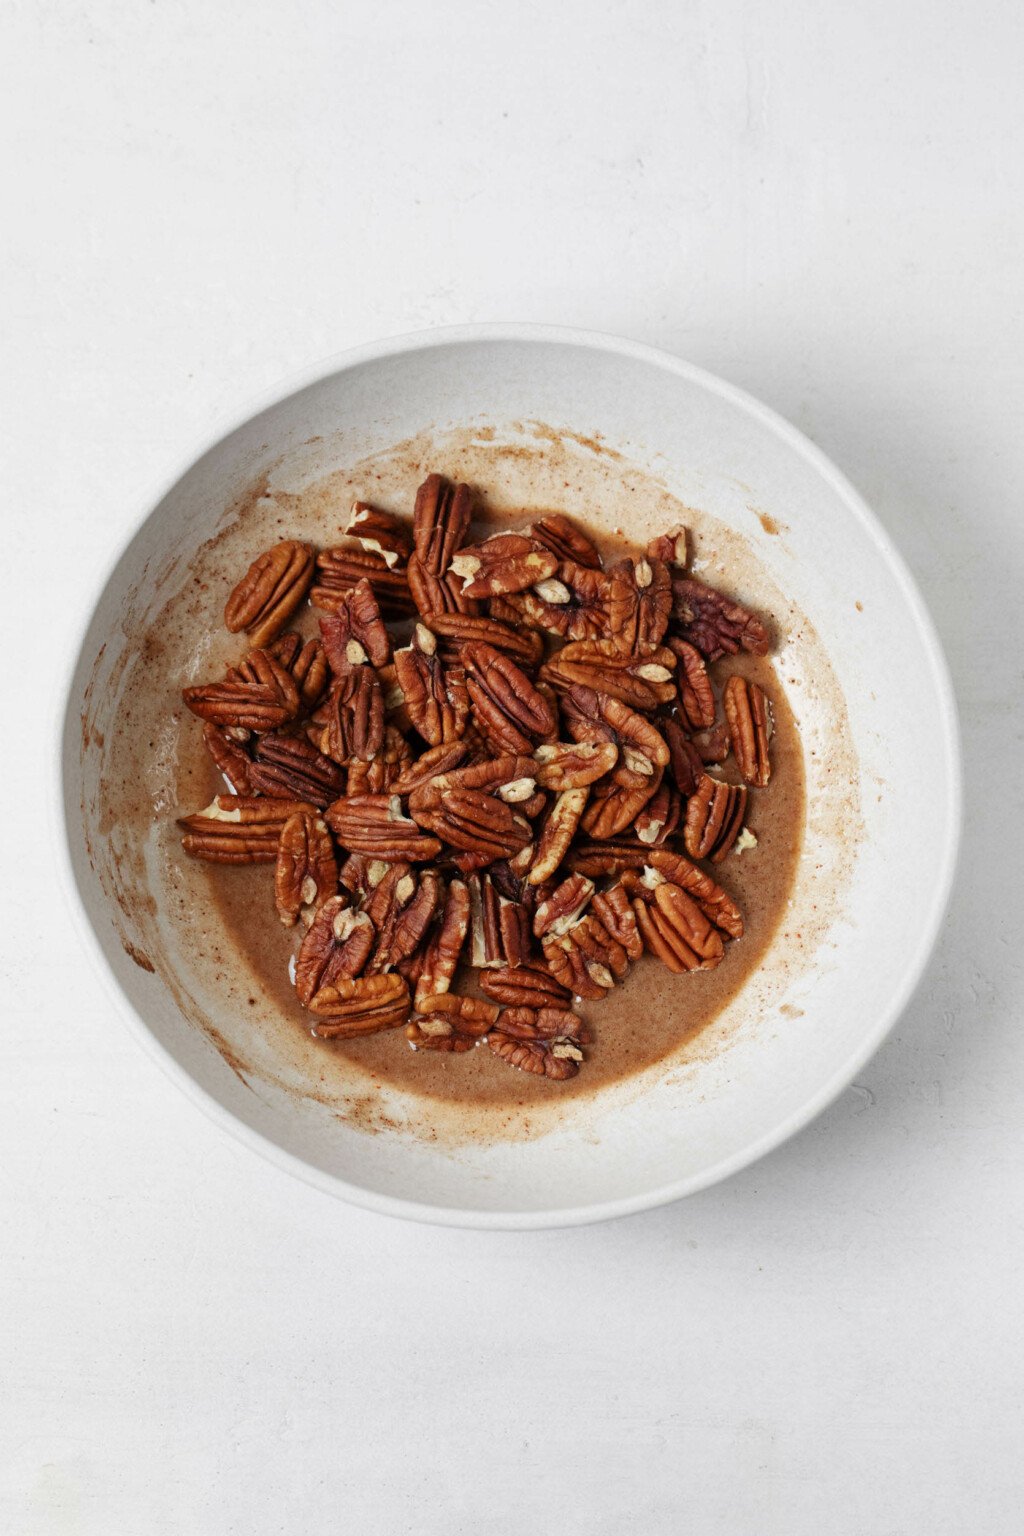 A small white bowl is filled with pecans that are being glazed in a viscous liquid. It rests on a white surface.